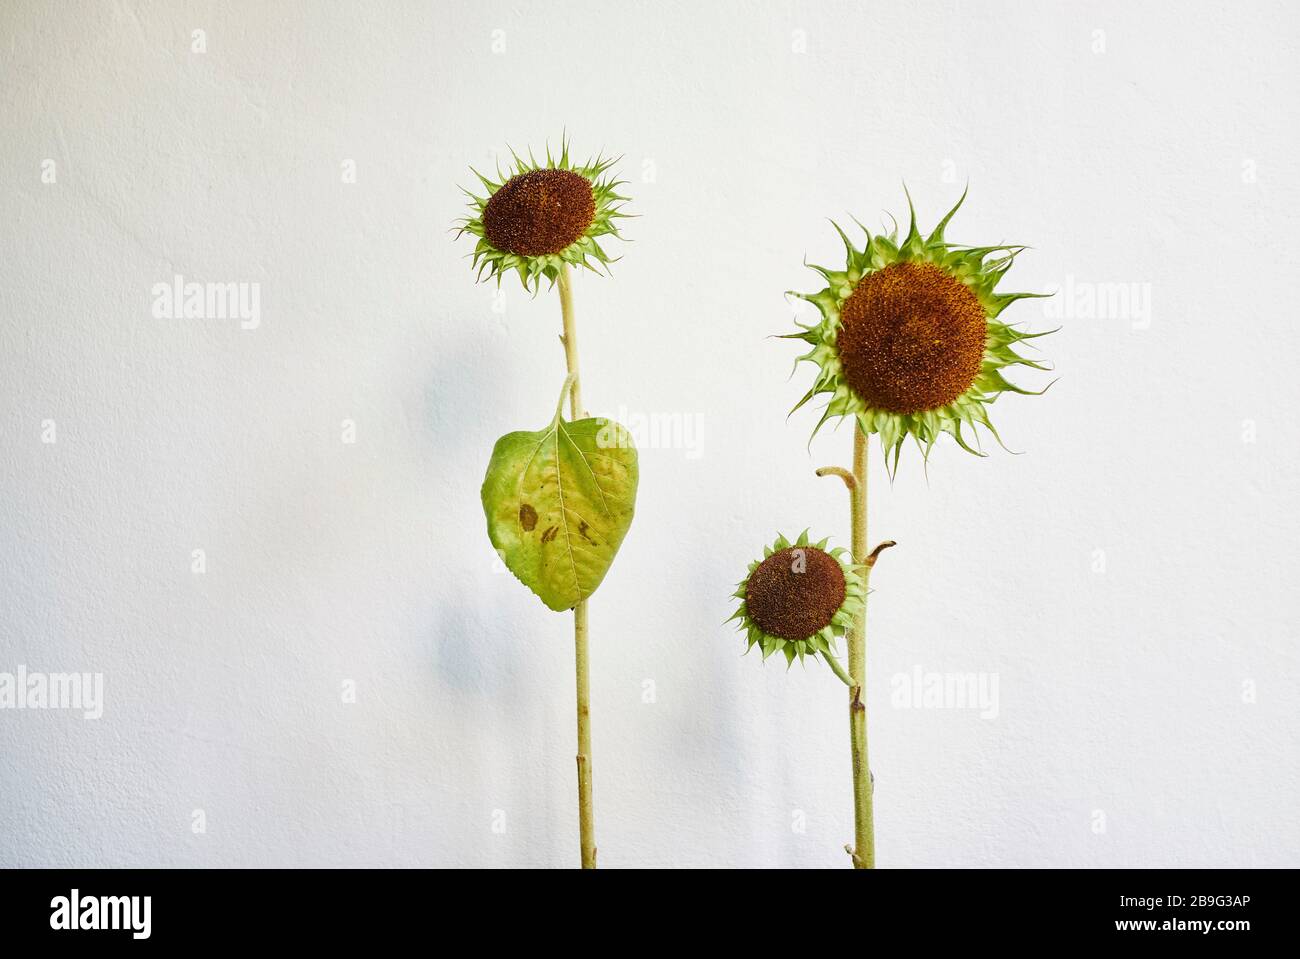 Green sunflowers against white background Stock Photo